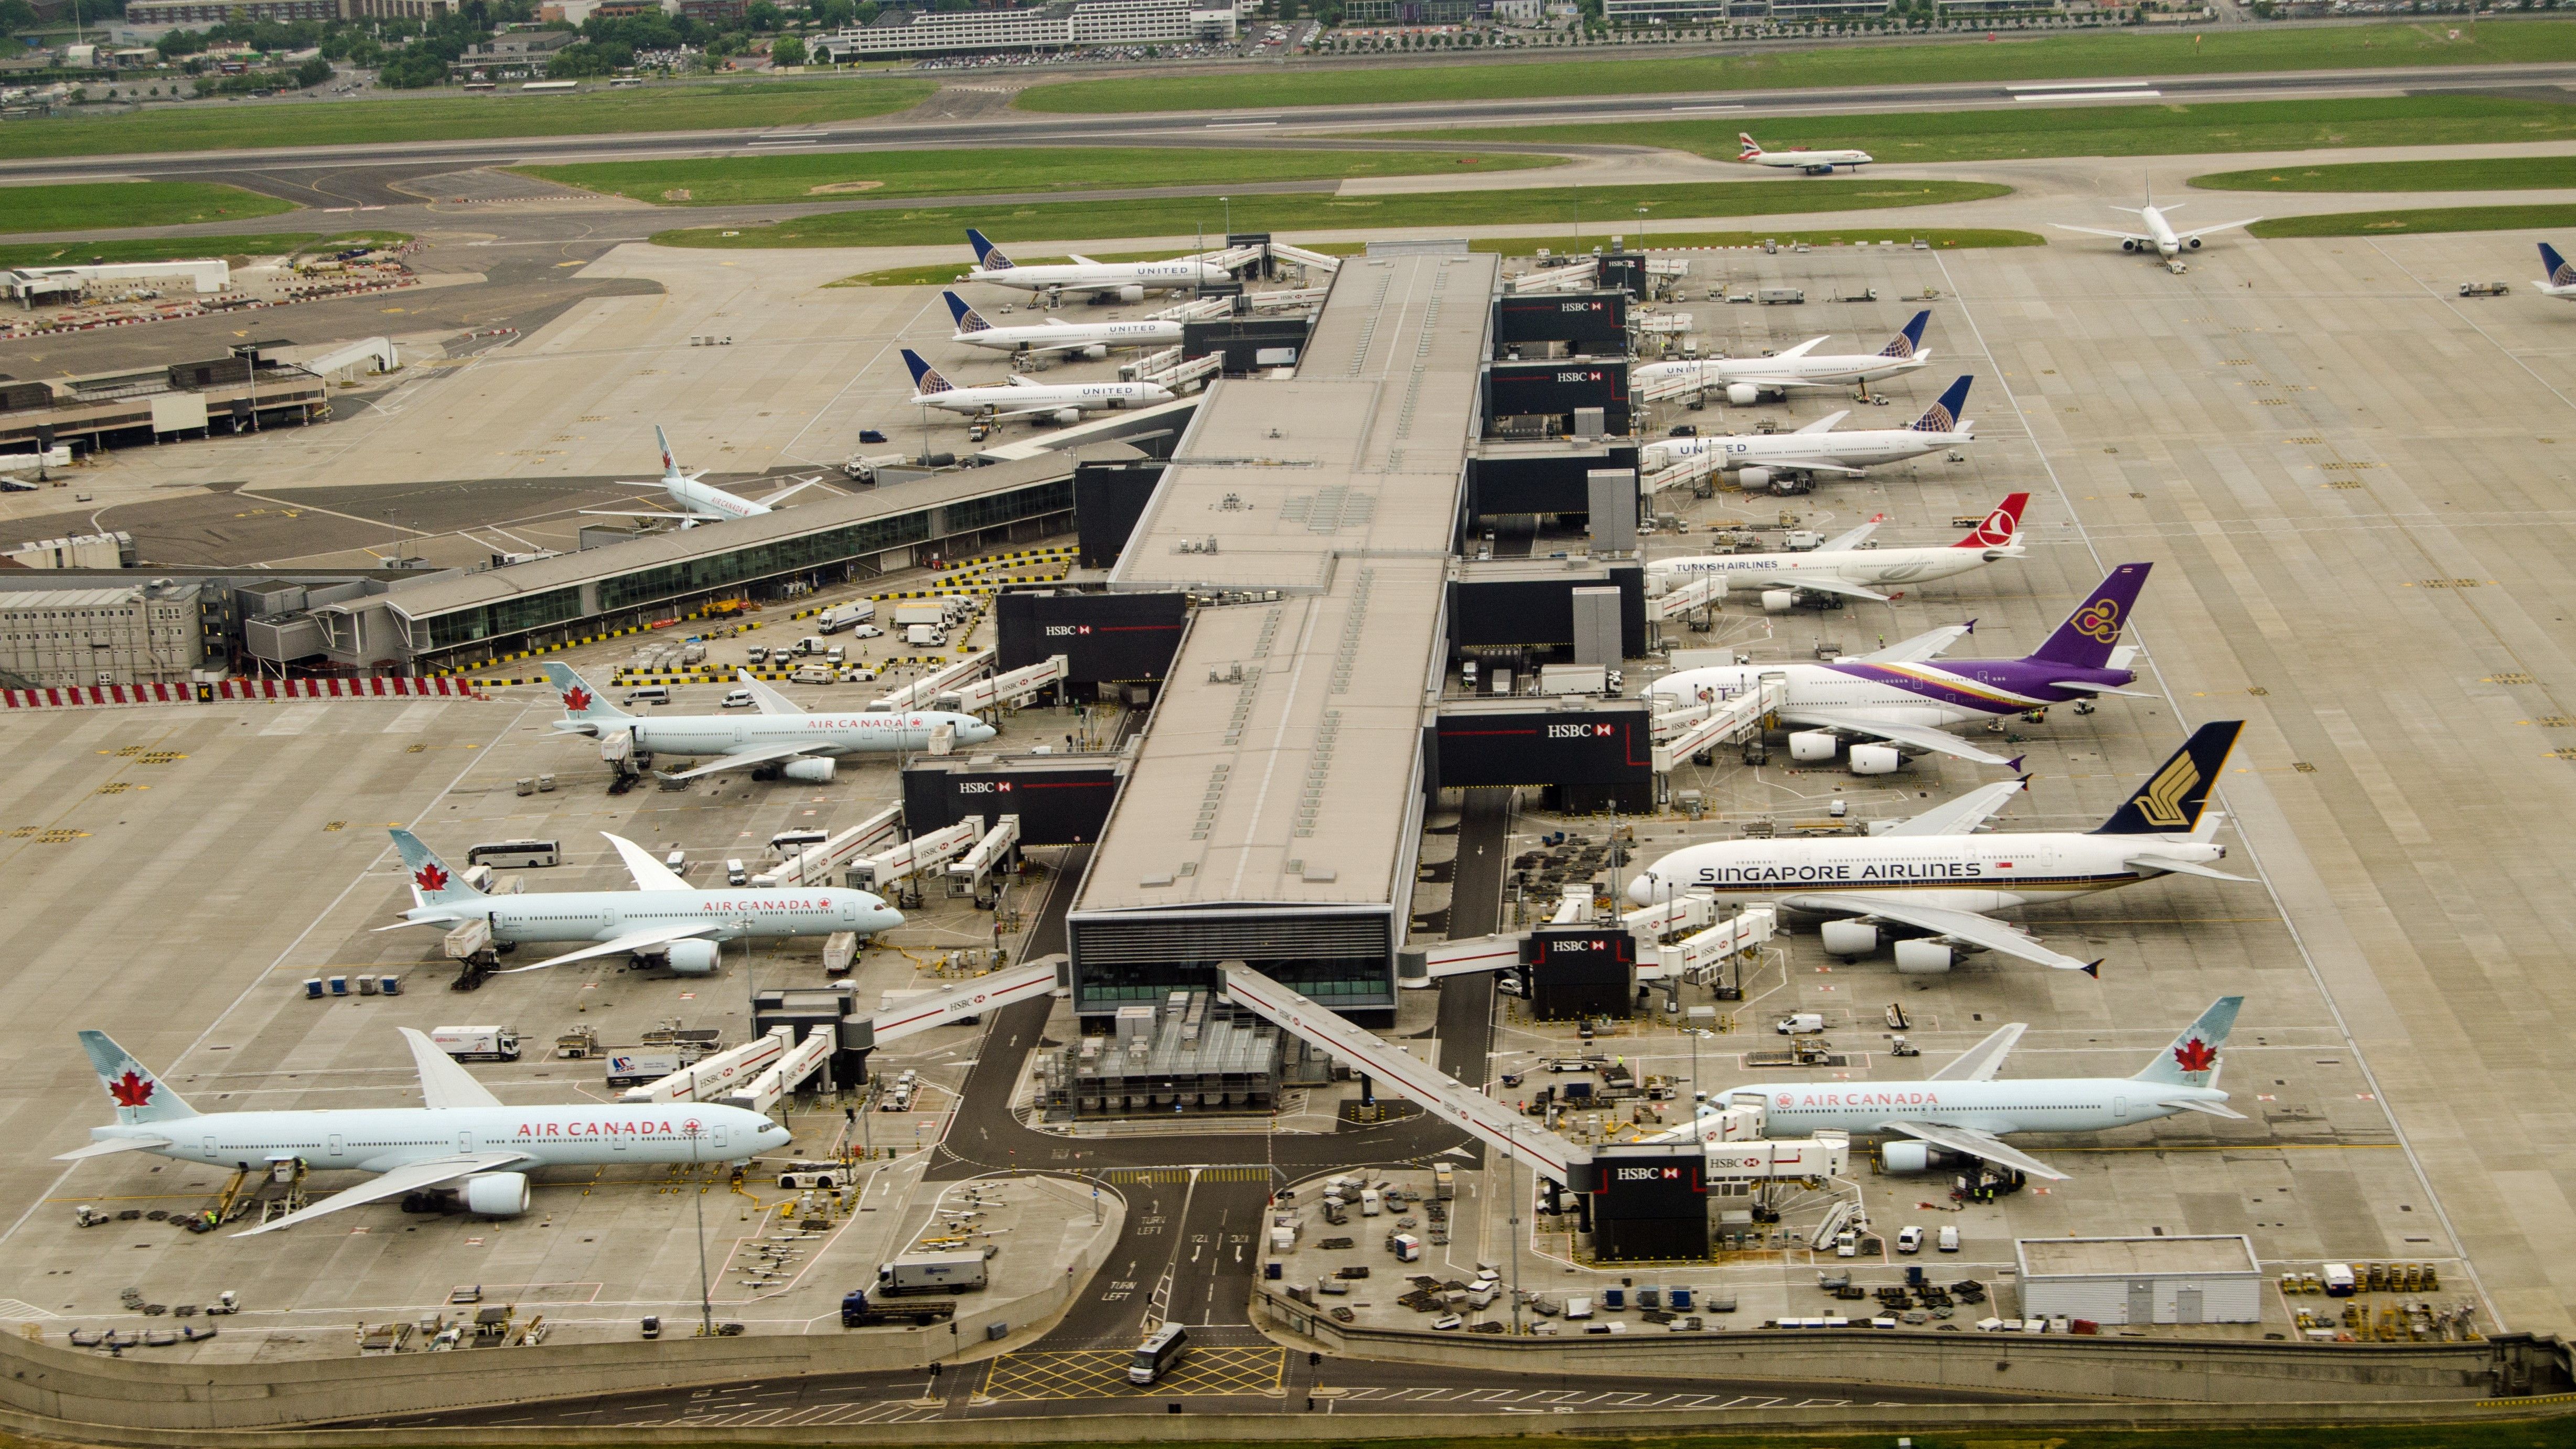 Aircraft parked at LHR terminal 2 By BasPhoto from Shutterstock